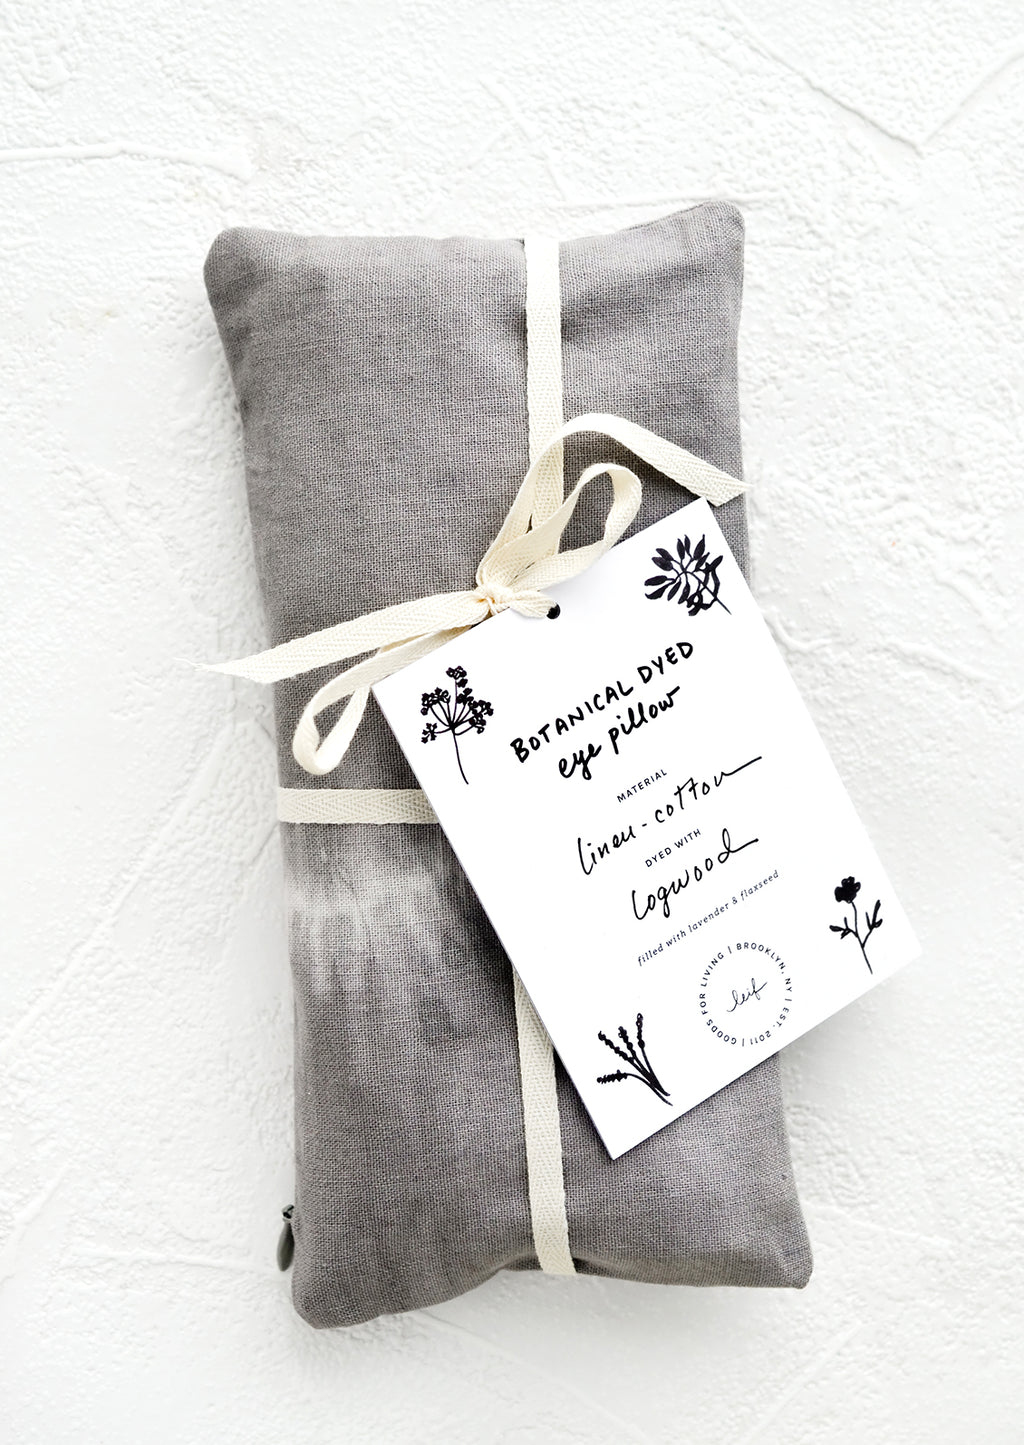 Logwood: A naturally dyed relaxation eye pillow in dark grey and white tie dye.